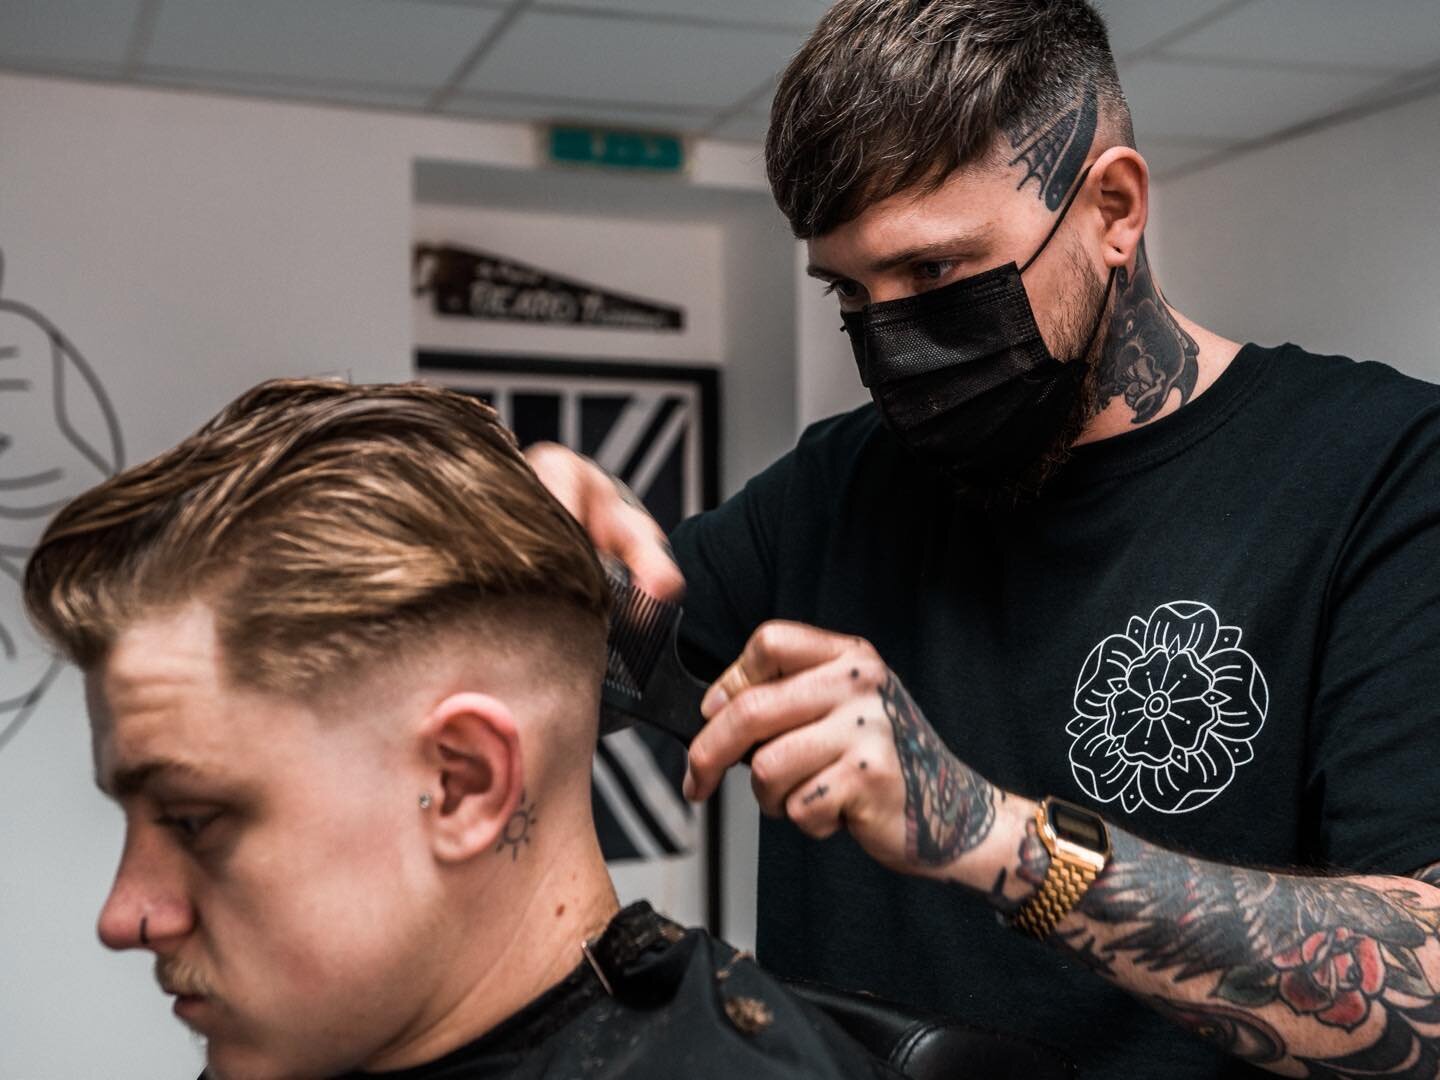 Appointments filling up fast this week! Drop us a DM or get booked in via @booksyuk to secure your place! 🤟🏻💈 @blackrosebarberjoe